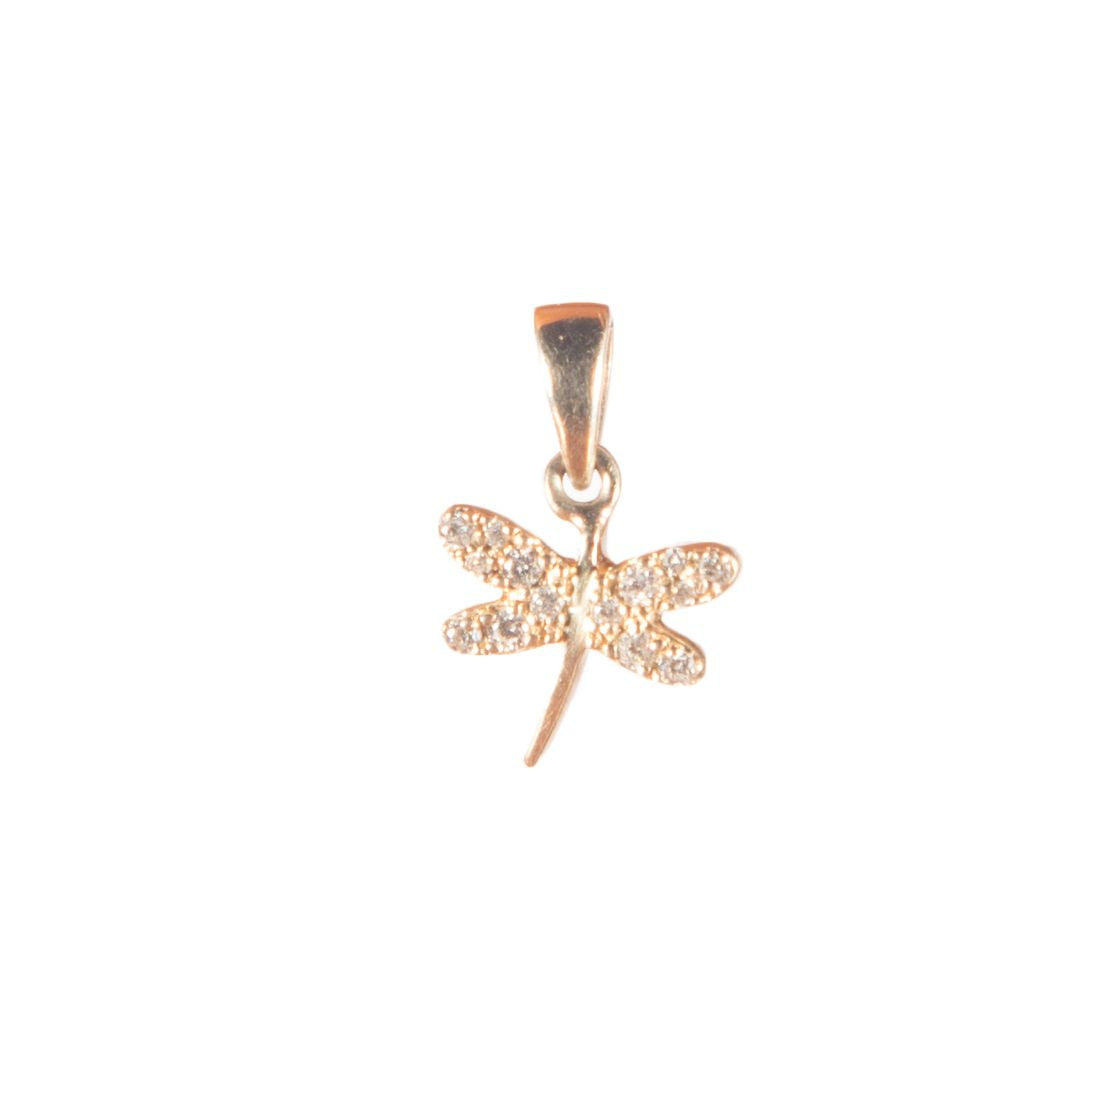 S.Row Designs Dragonfly Charm